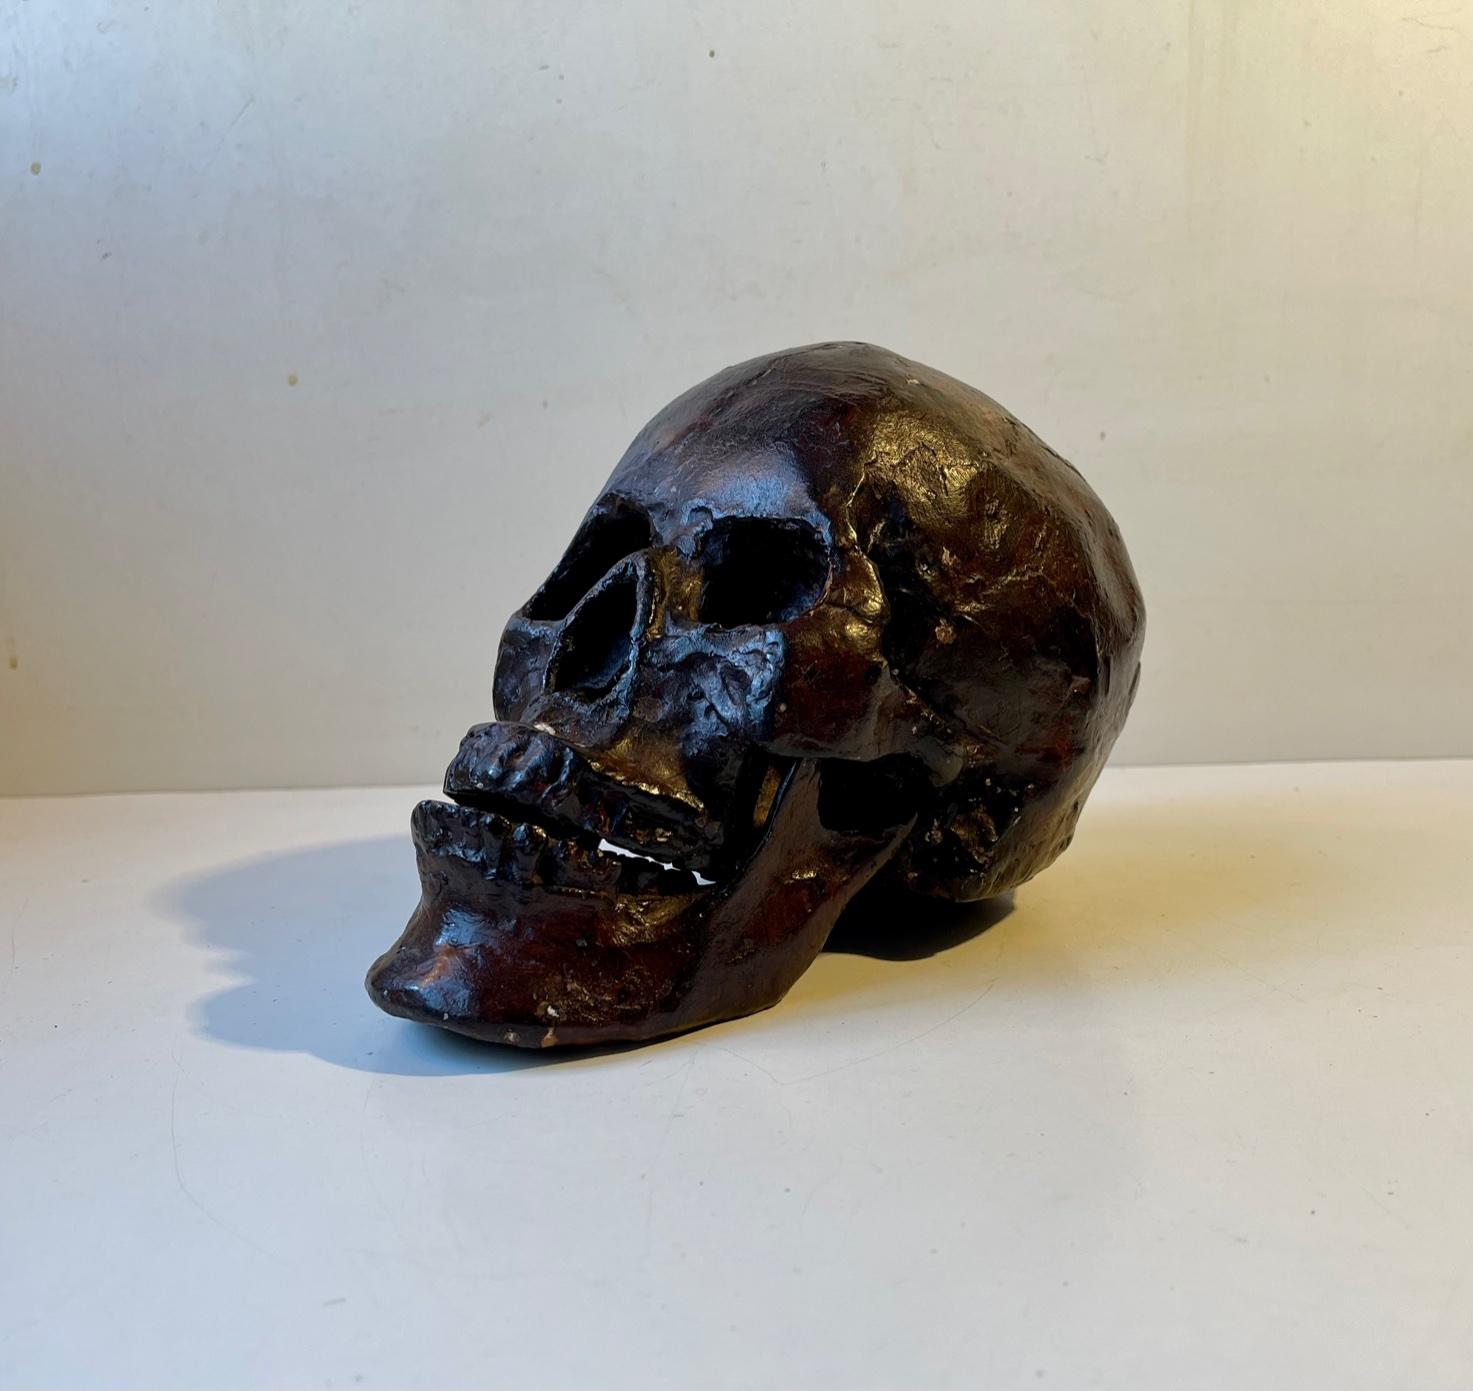 A rare 1:1 cast of a human skull in bronze. Its made from a cast of a real human skull, probably female, and is complete with teeth, lower- and upper jaw. This particular example has a brown verdigris patina. The skull as a symbol serves as a